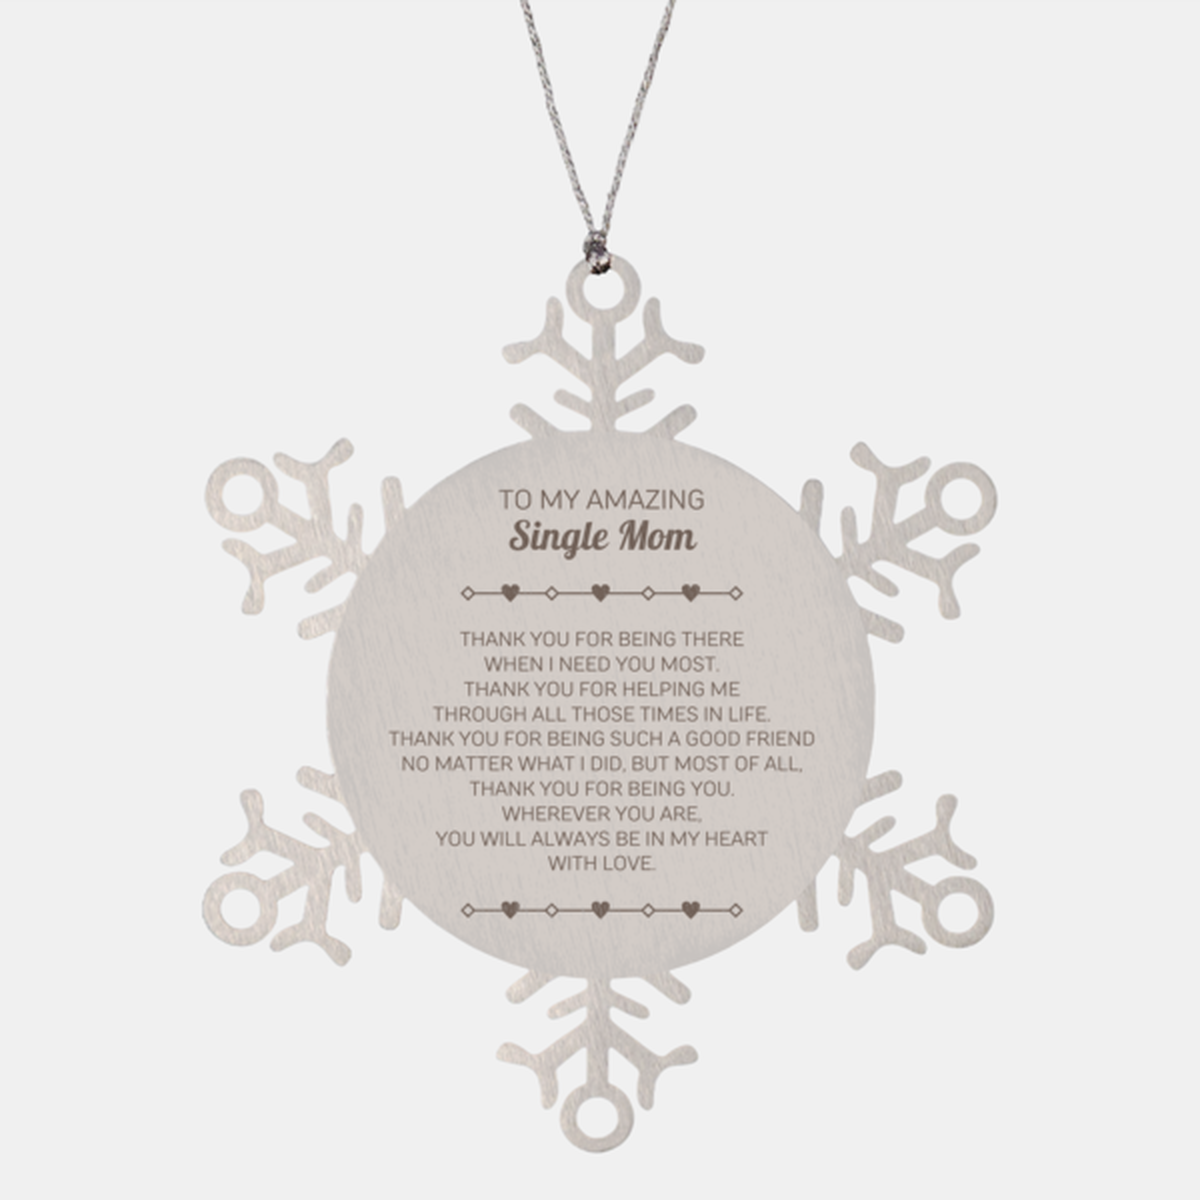 To My Amazing Single Mom Snowflake Ornament, Thank you for being there, Thank You Gifts For Single Mom, Birthday, Christmas Unique Gifts For Single Mom